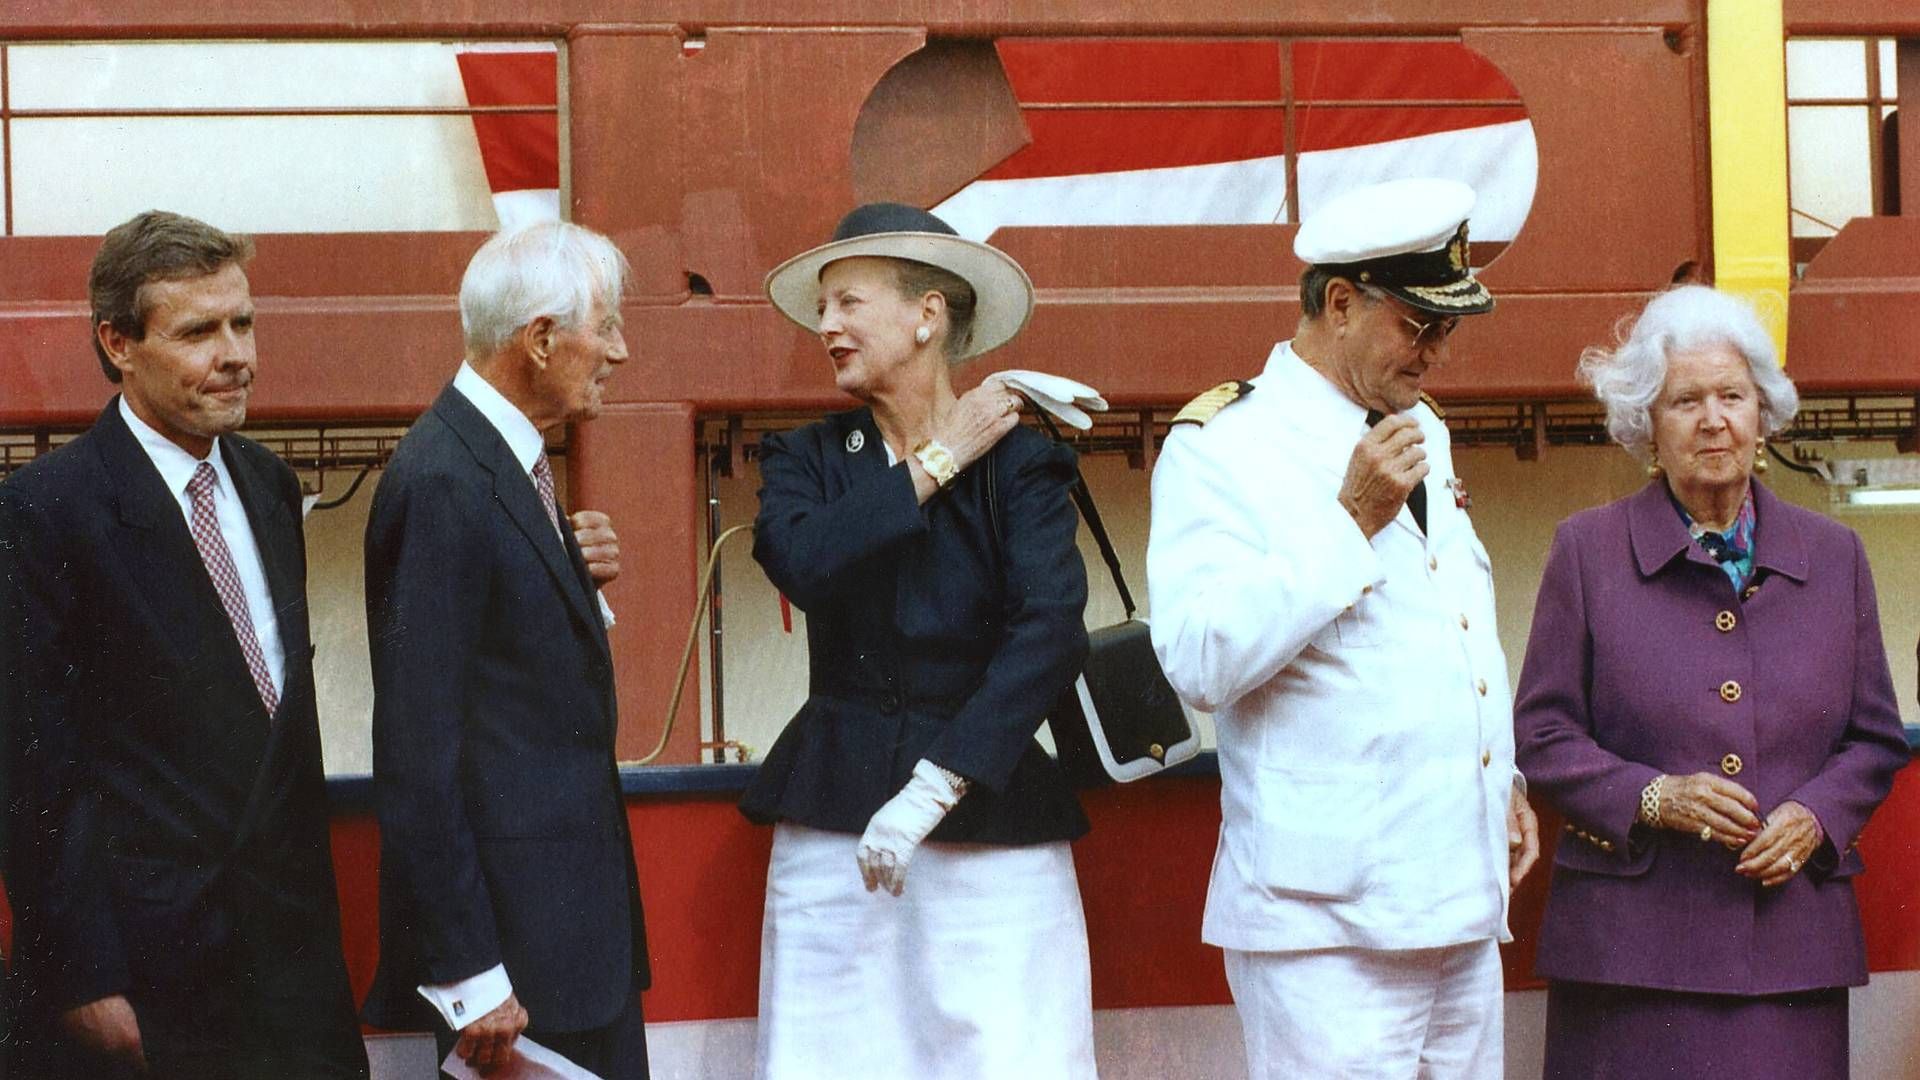 Maersk group head at the time Jess Søderberg, Mærsk Mc-Kinney Møller, the Queen of Denmark, Margrethe II, and Prince Henrik of Denmark in 1997 when the ship was launched. | Photo: Carsten Andreasen/Ritzau Scanpix